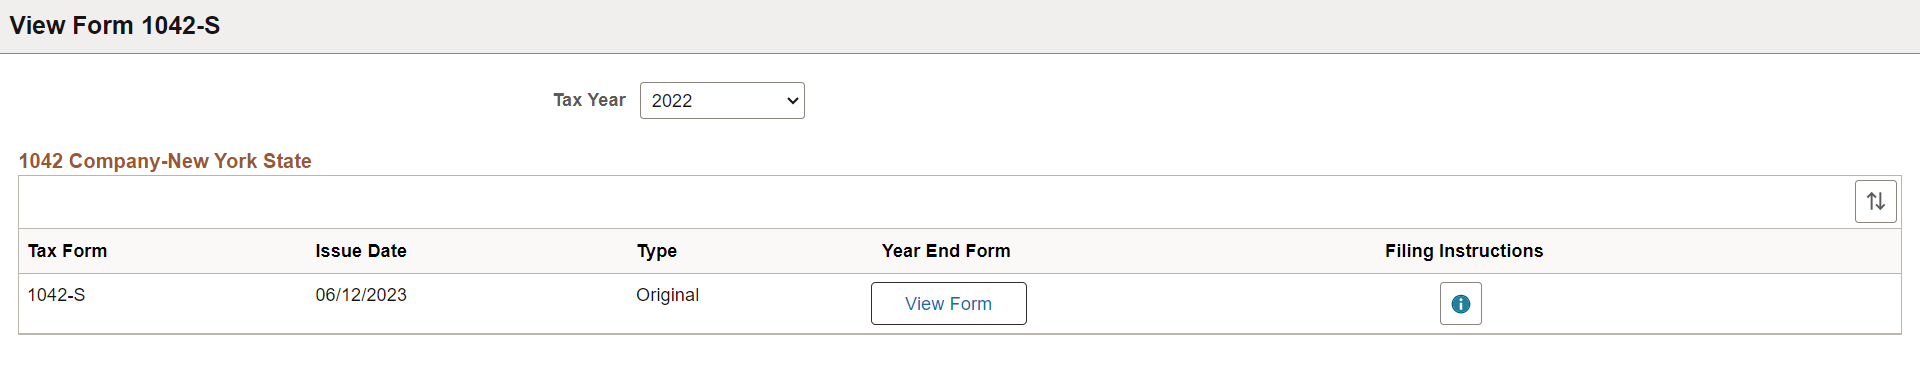 View Form 1042-S page